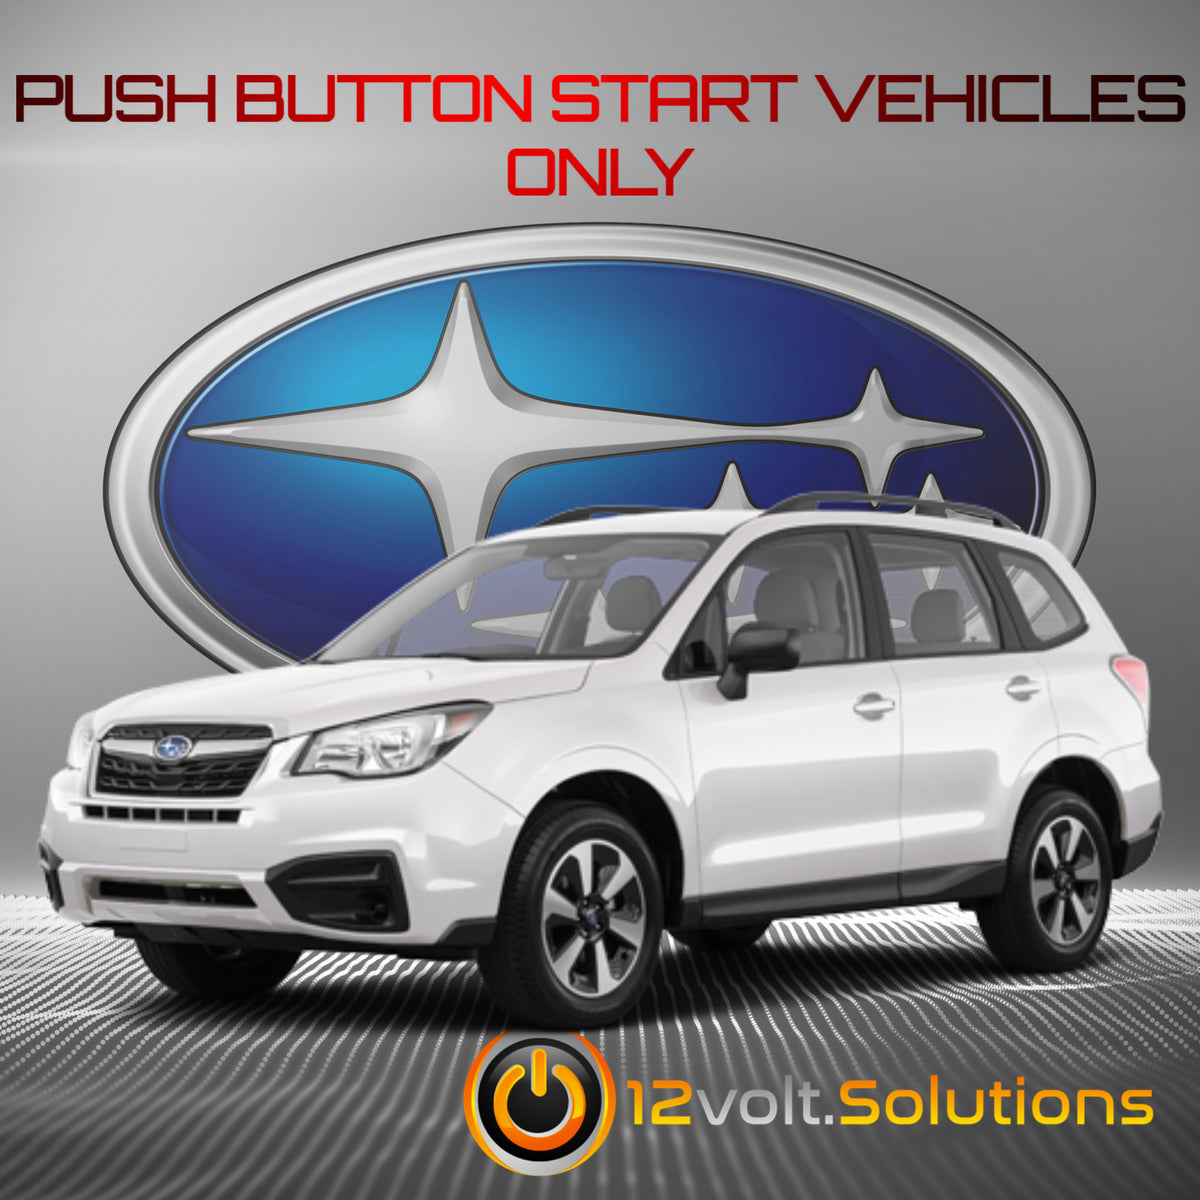 2019-2022 Subaru Forester Plug and Play Remote Start Kit (Push Button Start)-12Volt.Solutions